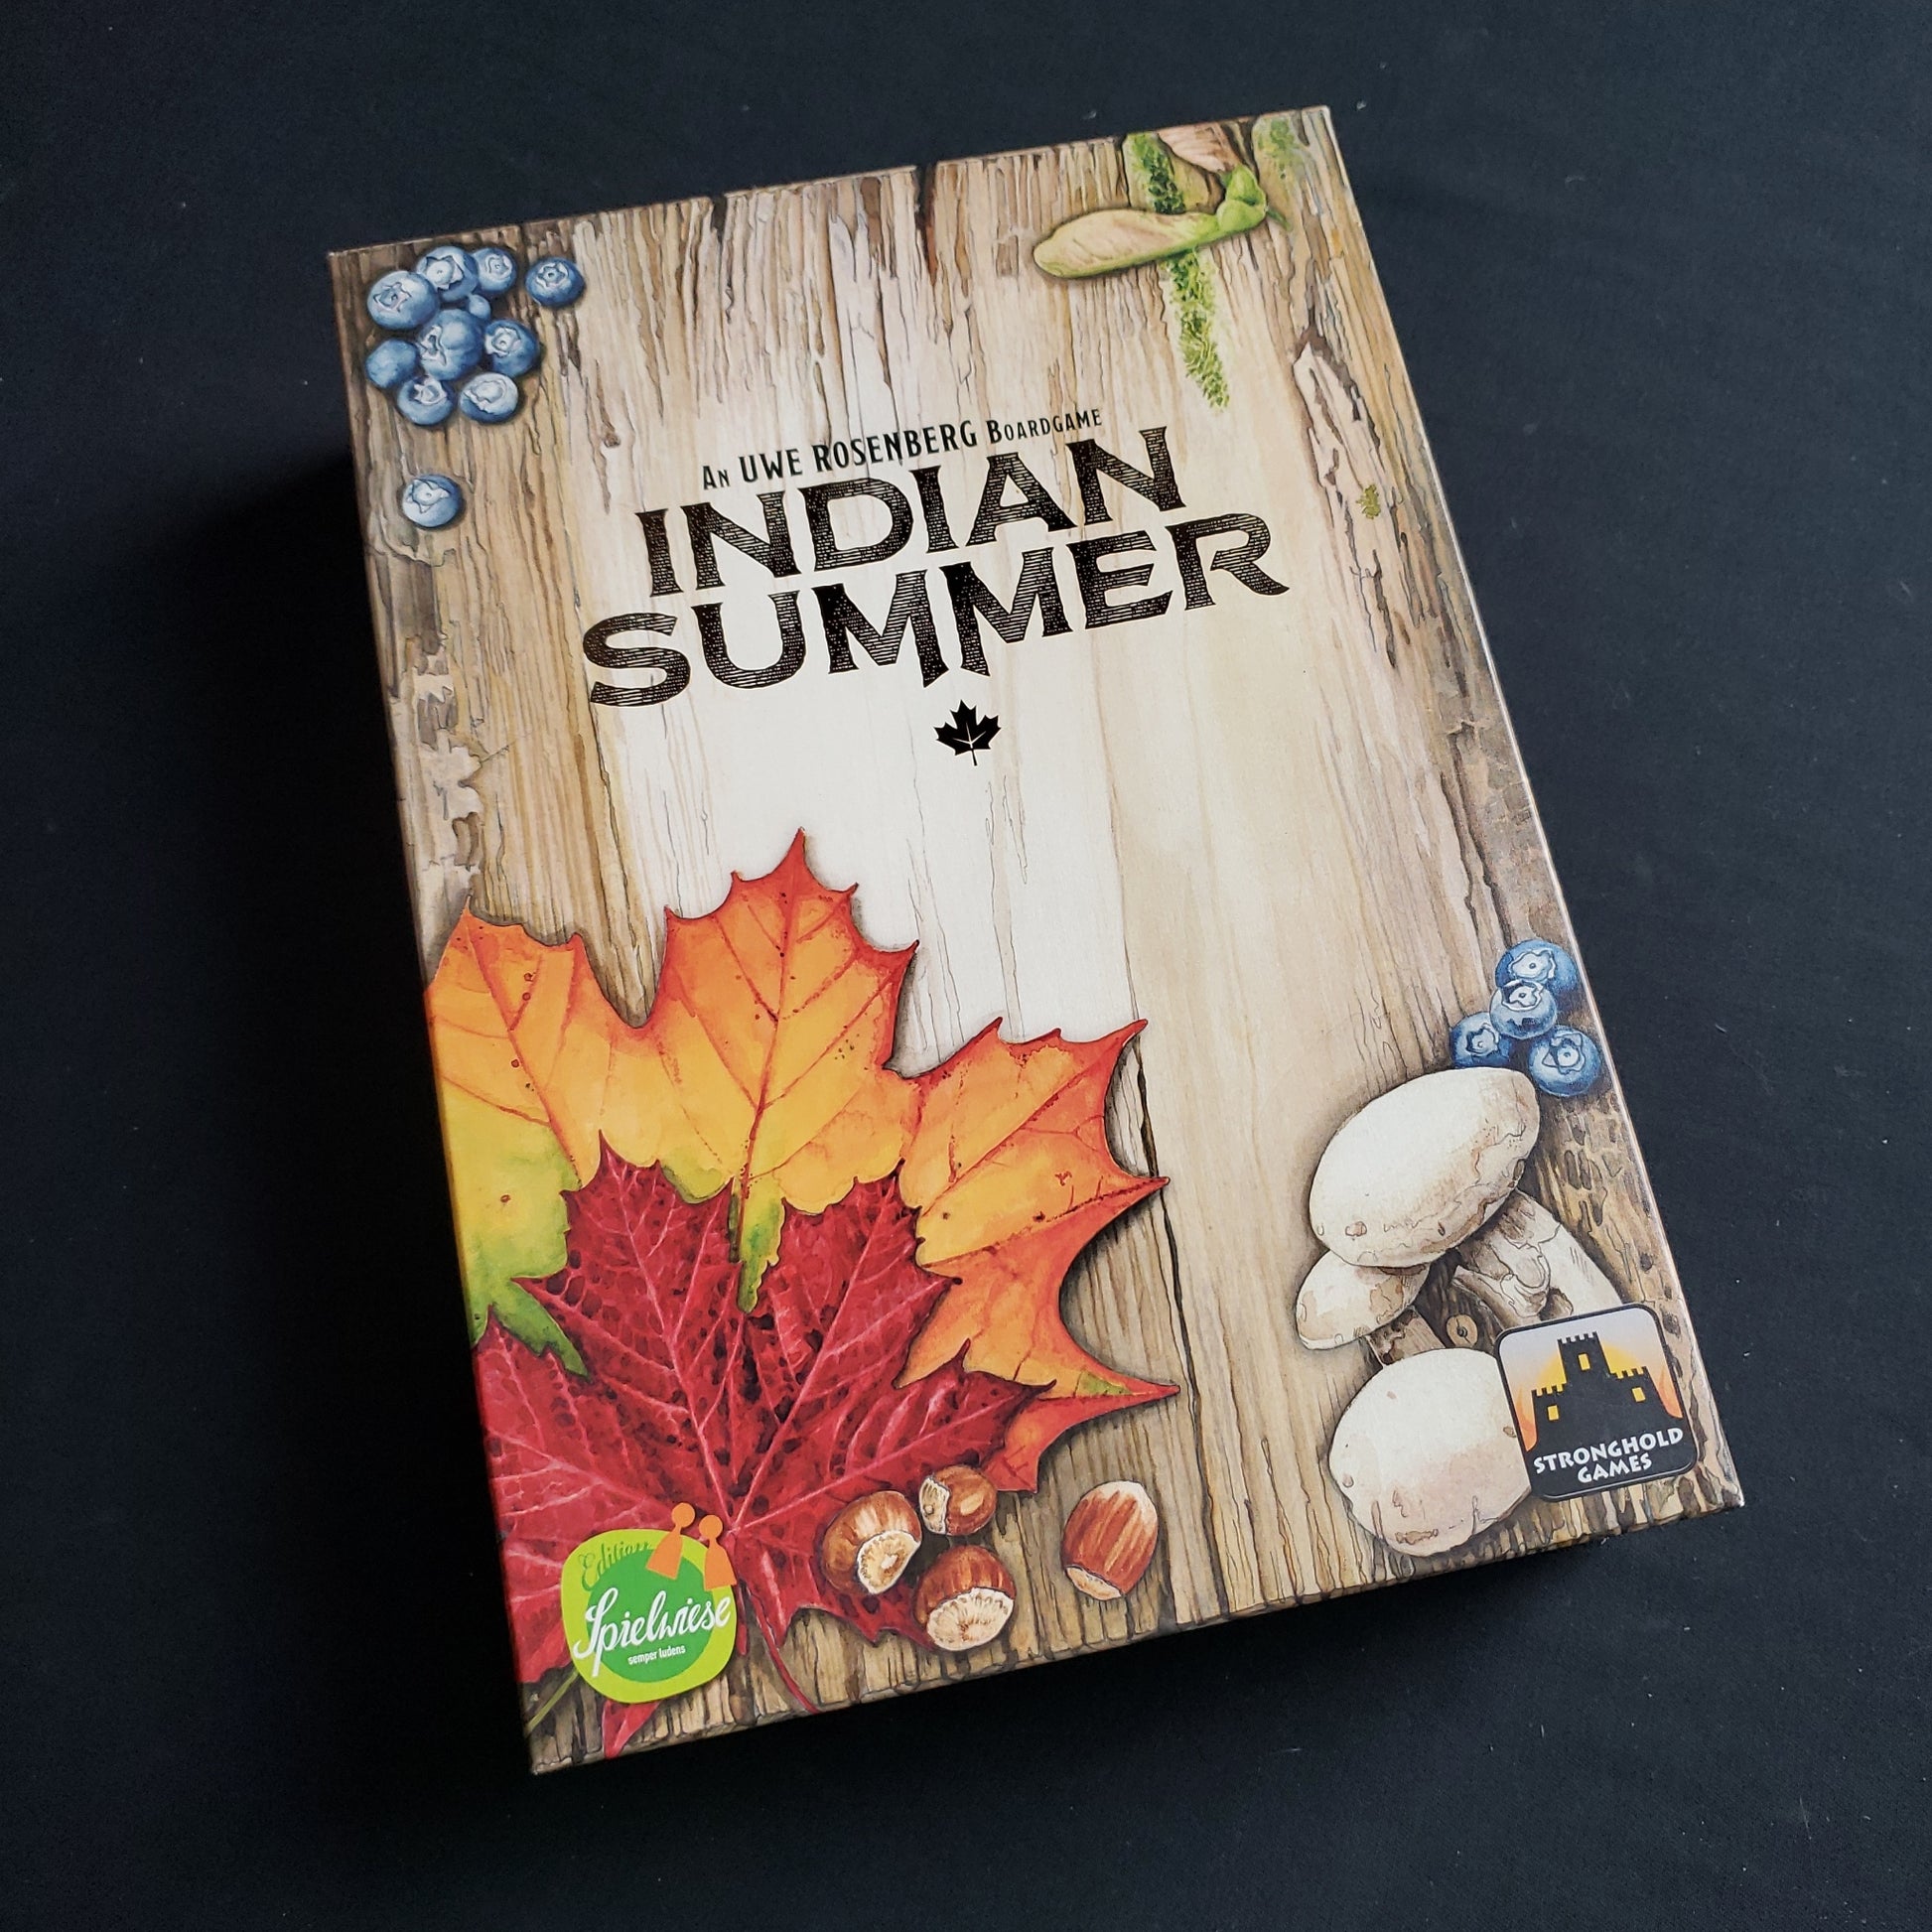 Image shows the front cover of the box of the Indian Summer board game